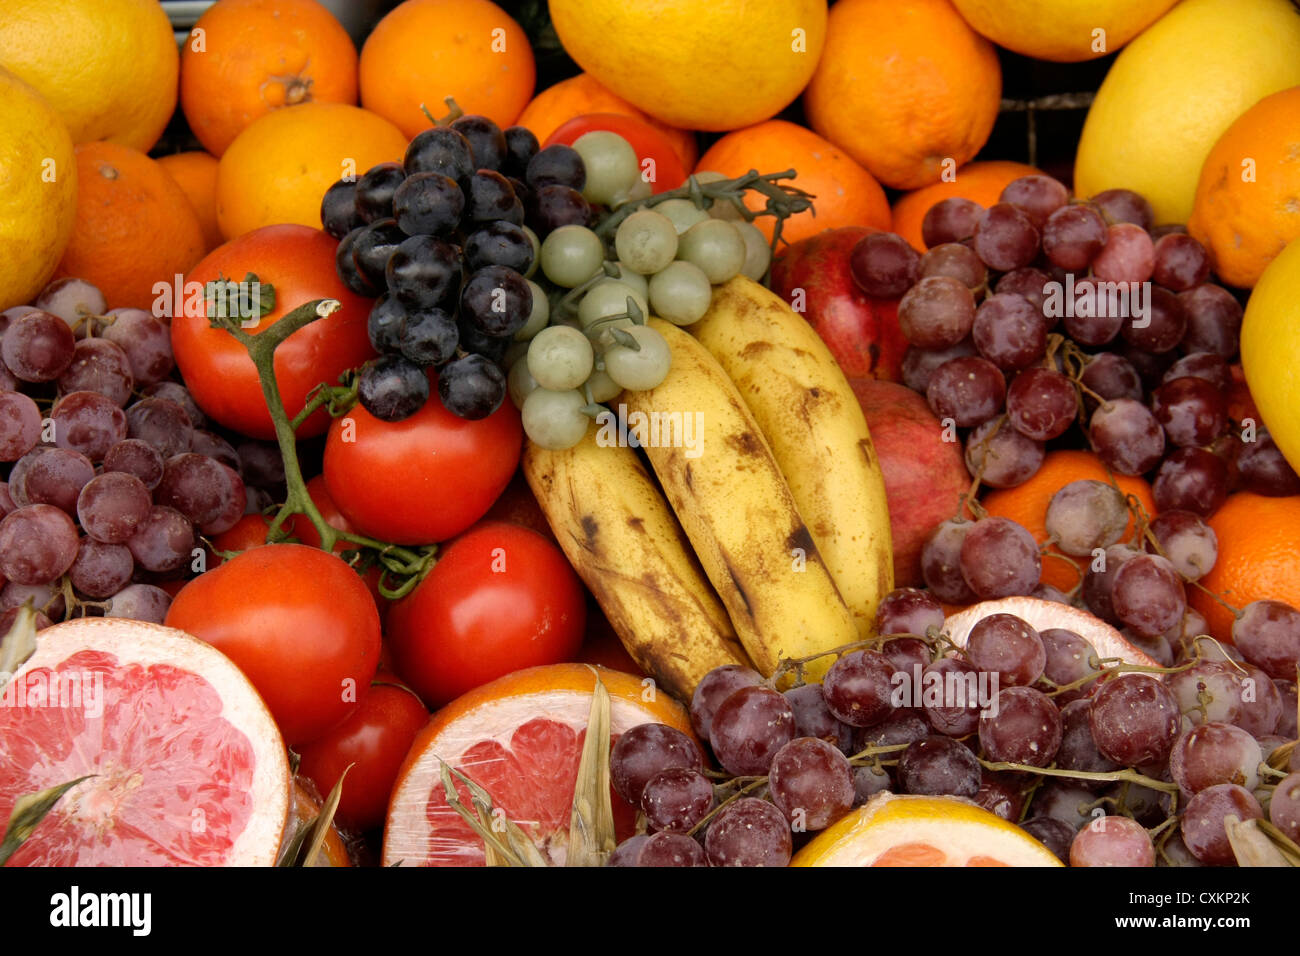 different types of fruits displayed for sale in a basket Stock Photo